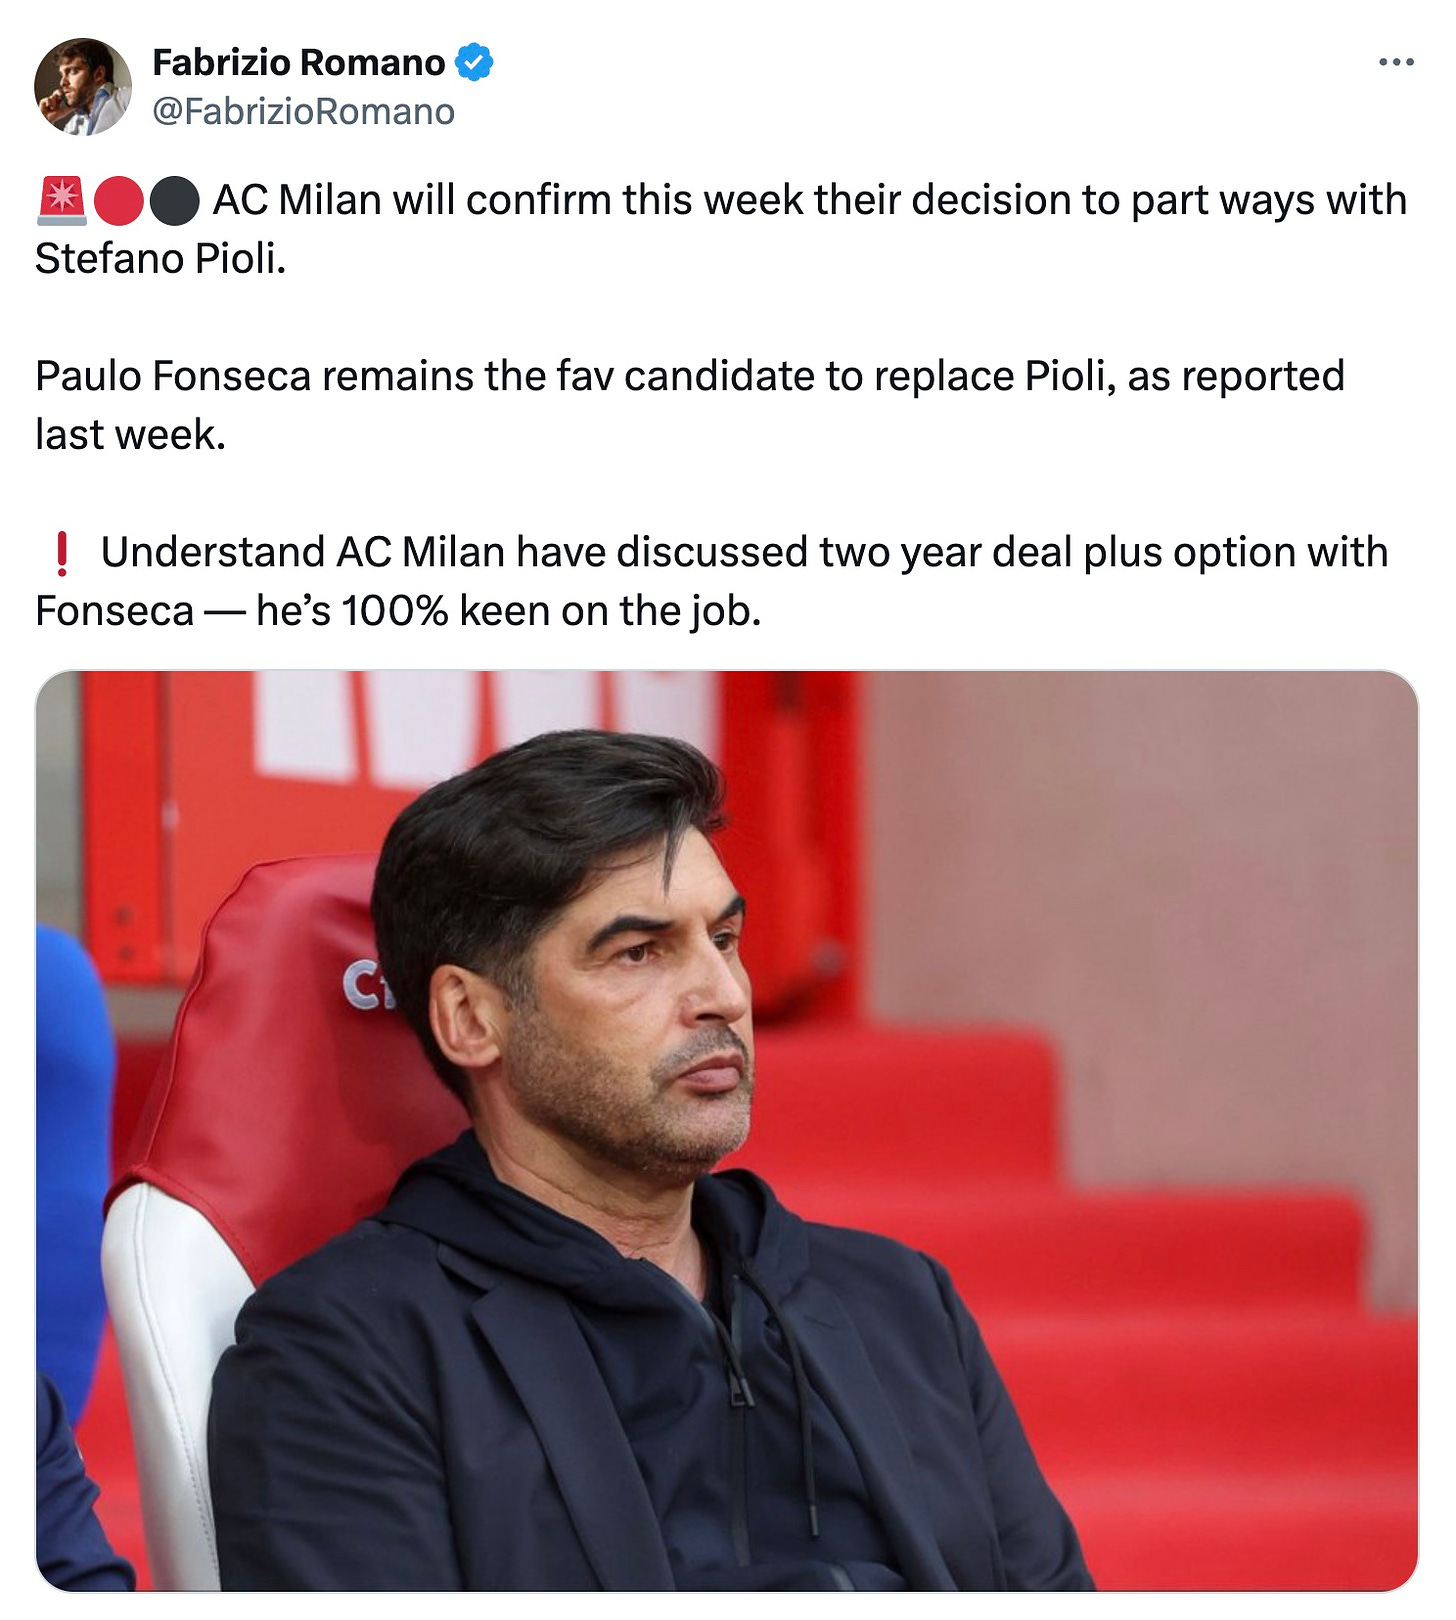 A tweet by Fabrizio Romano about Paulo Fonseca being the favourite to replace Stefano Pioli at AC Milan